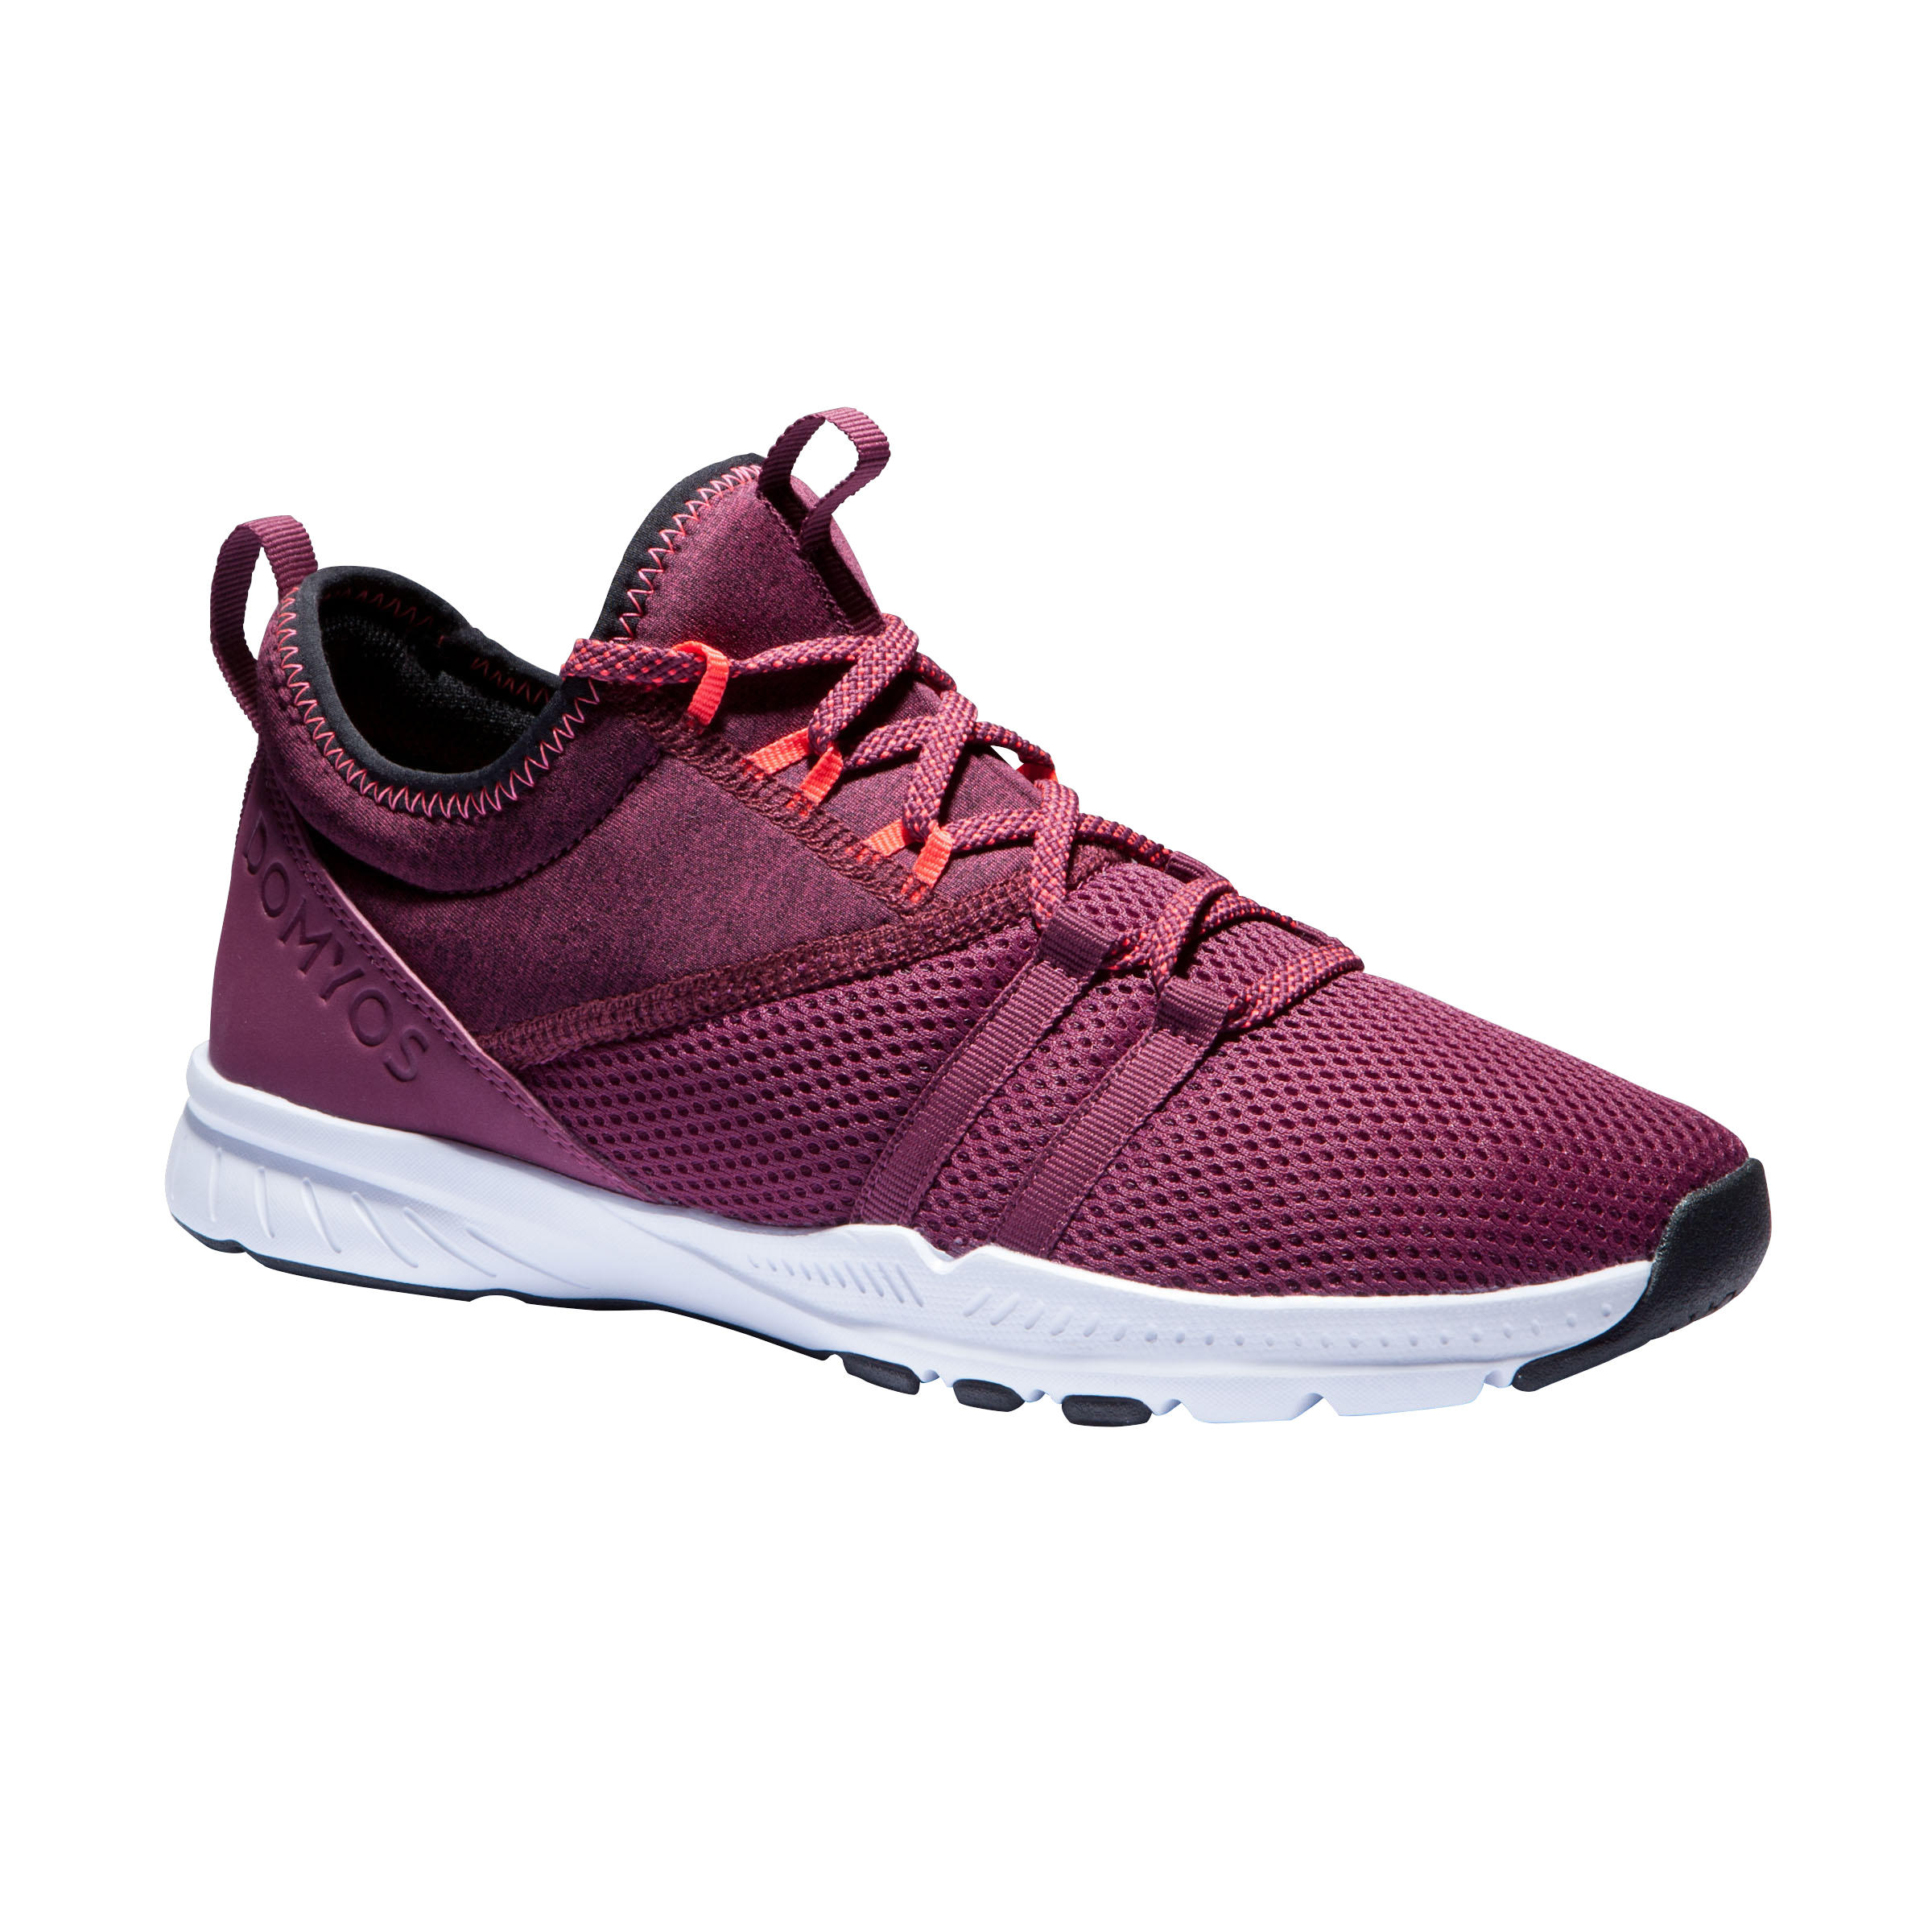 DOMYOS Women's Fitness Shoes 120 Mid - Burgundy